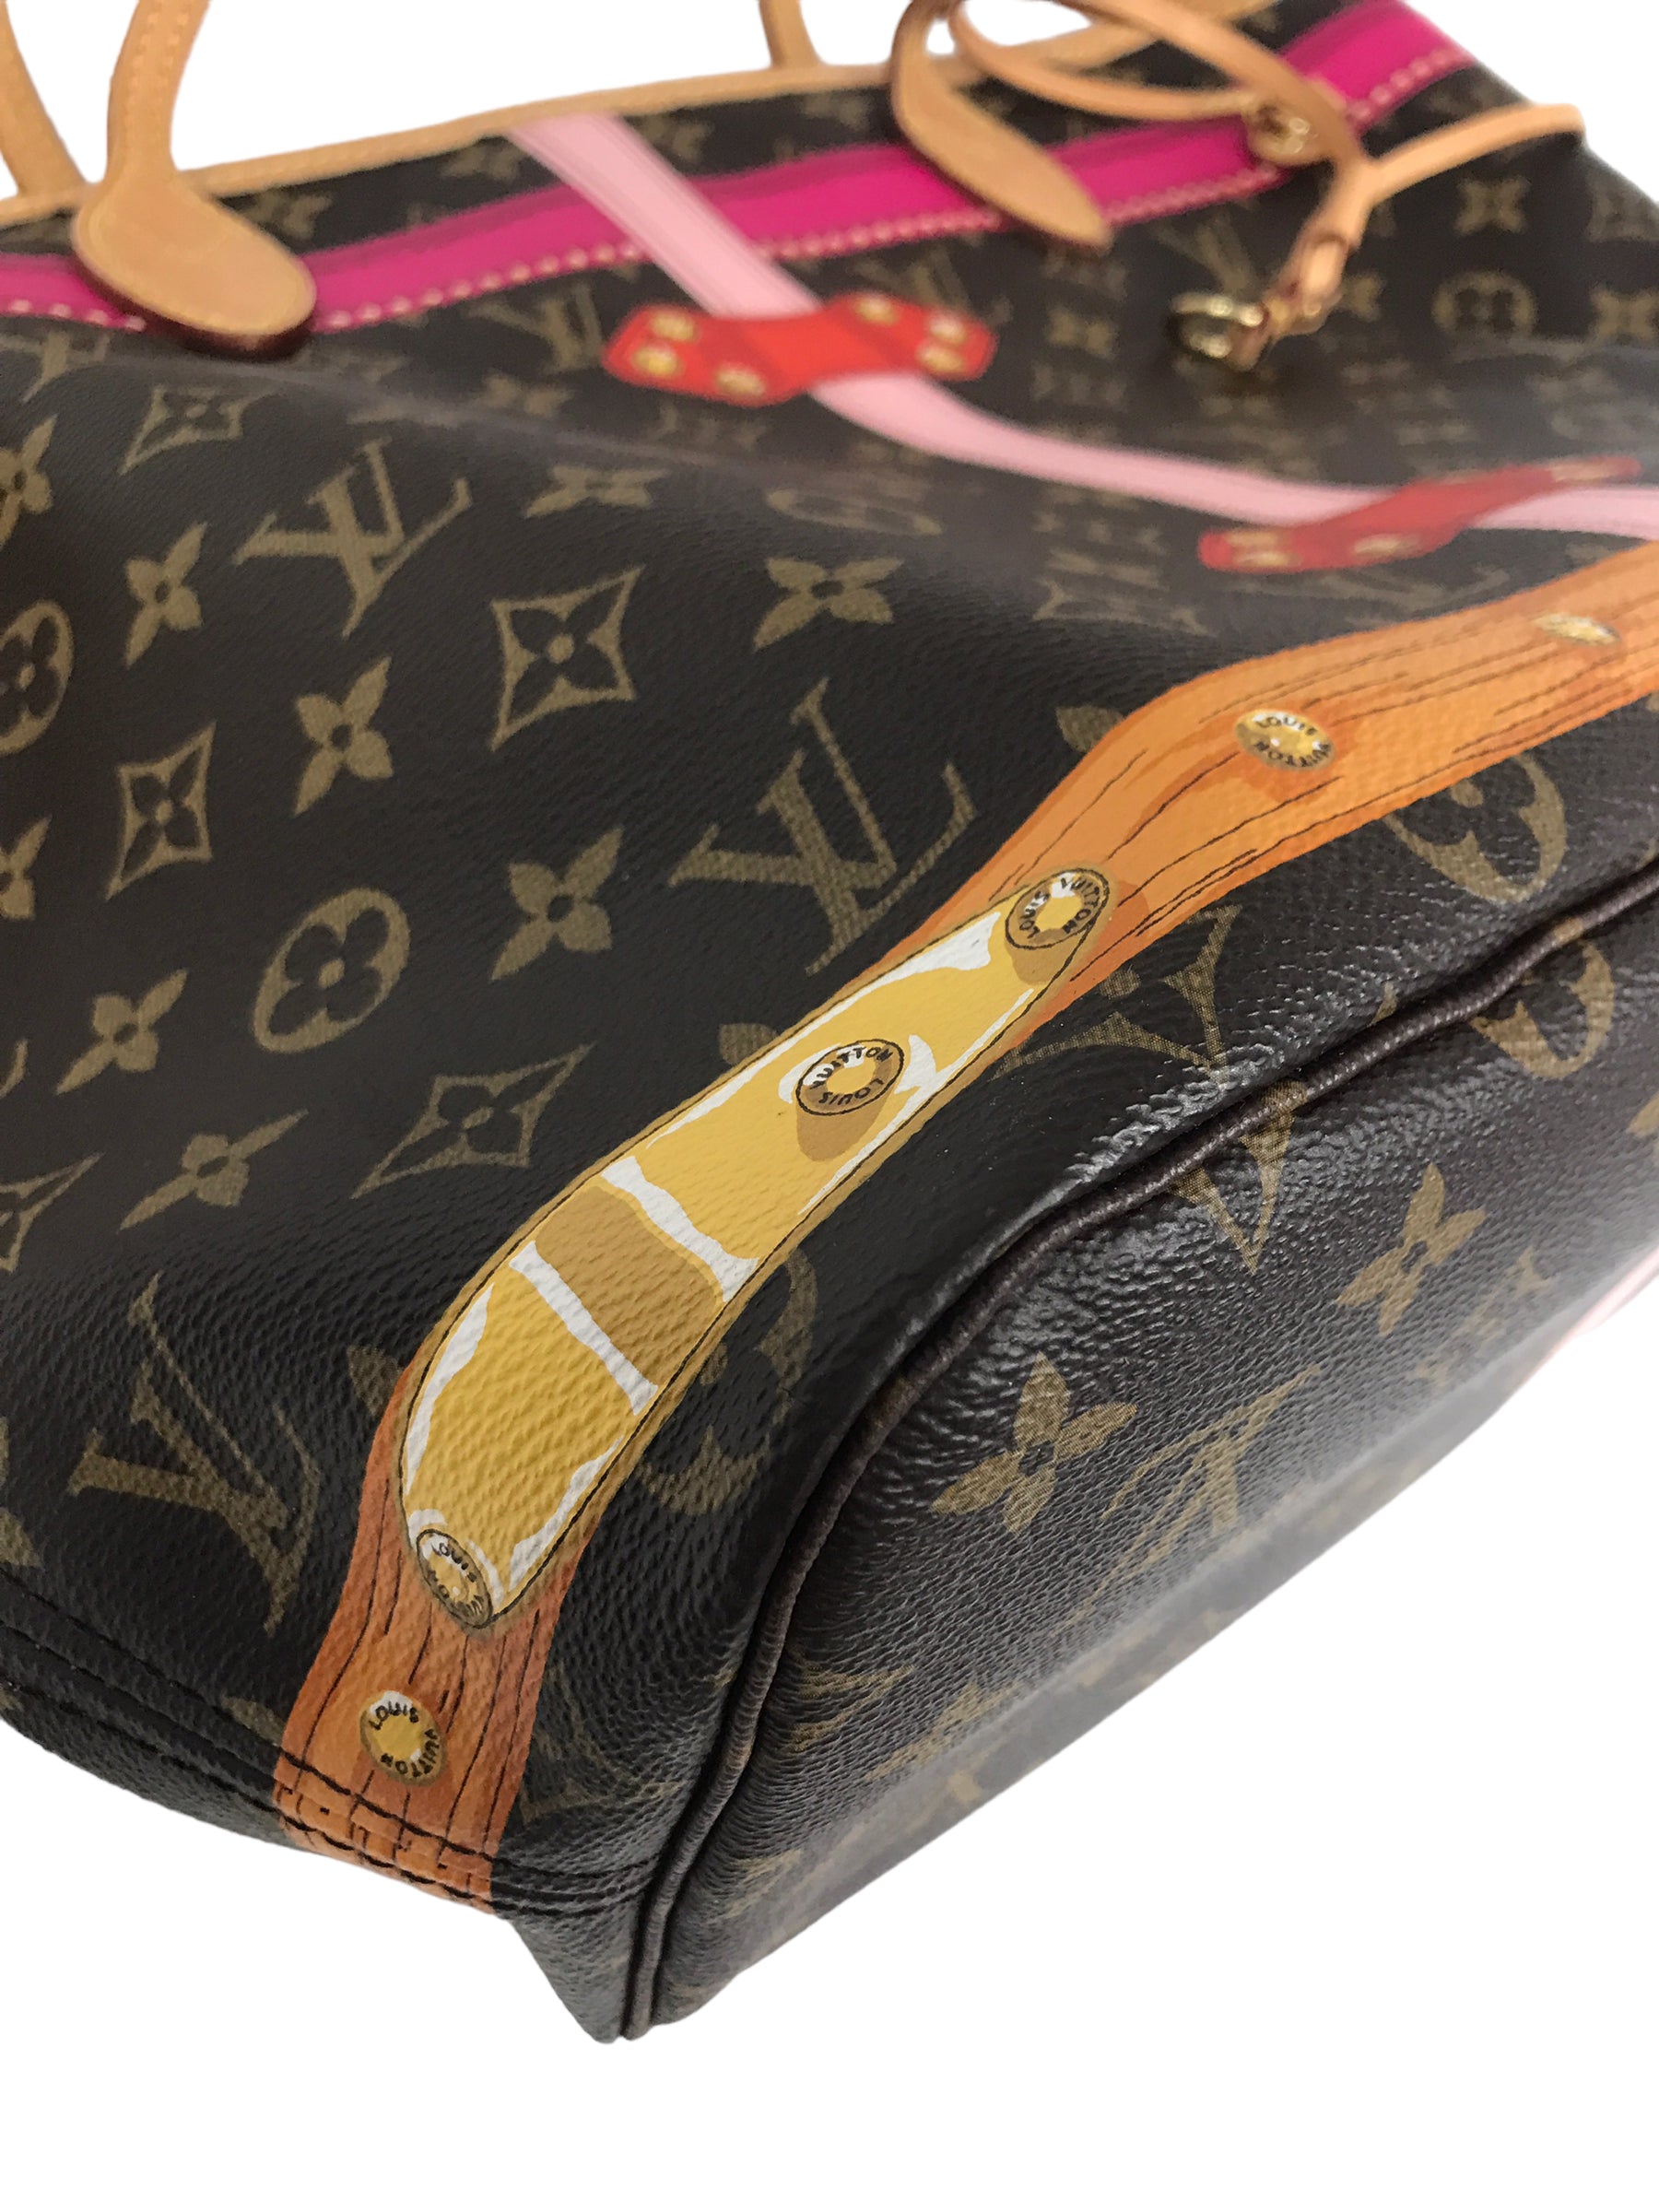 Louis Vuitton Brown Leather Neverfull Trunks Bag